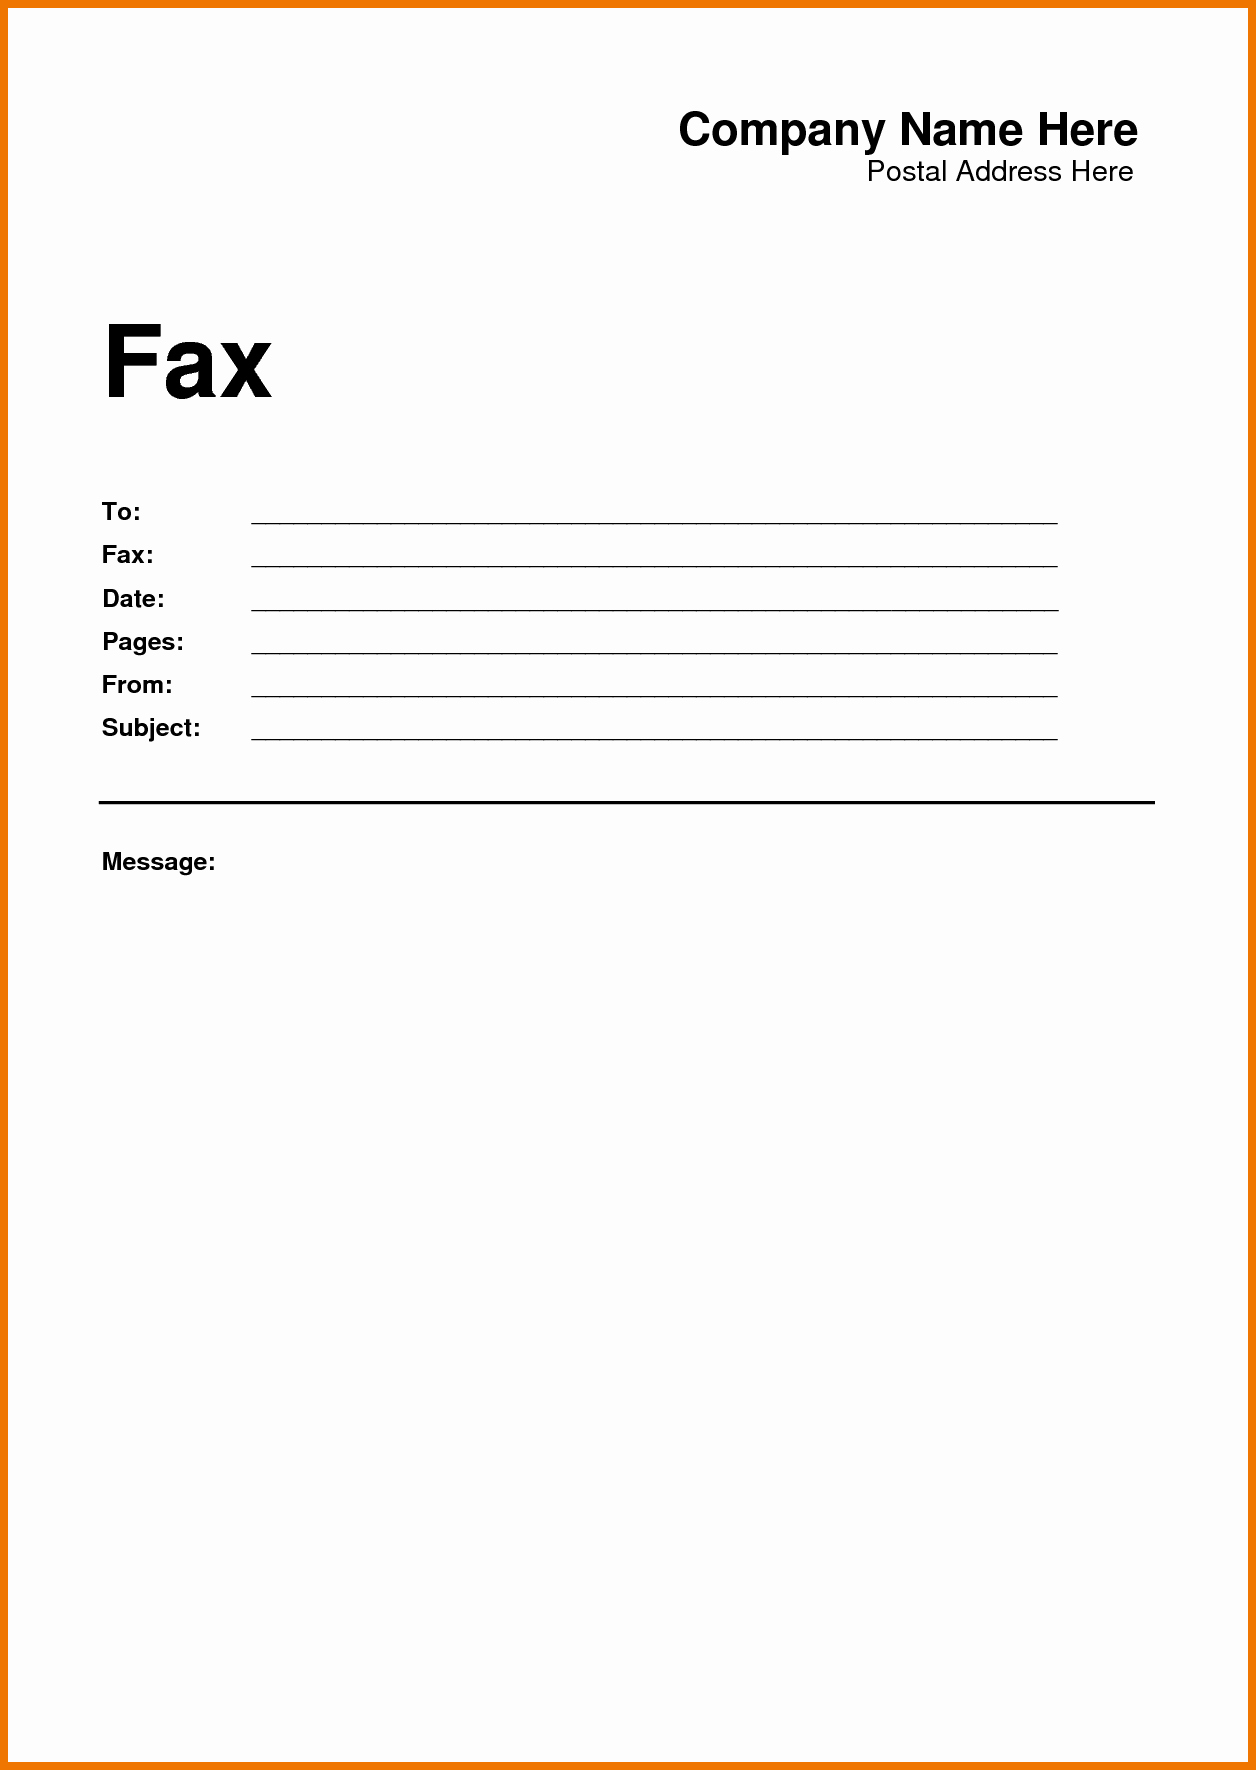 Fax Cover Sheet Pdf Free Lovely Fax Urgent Fax Cover Sheet